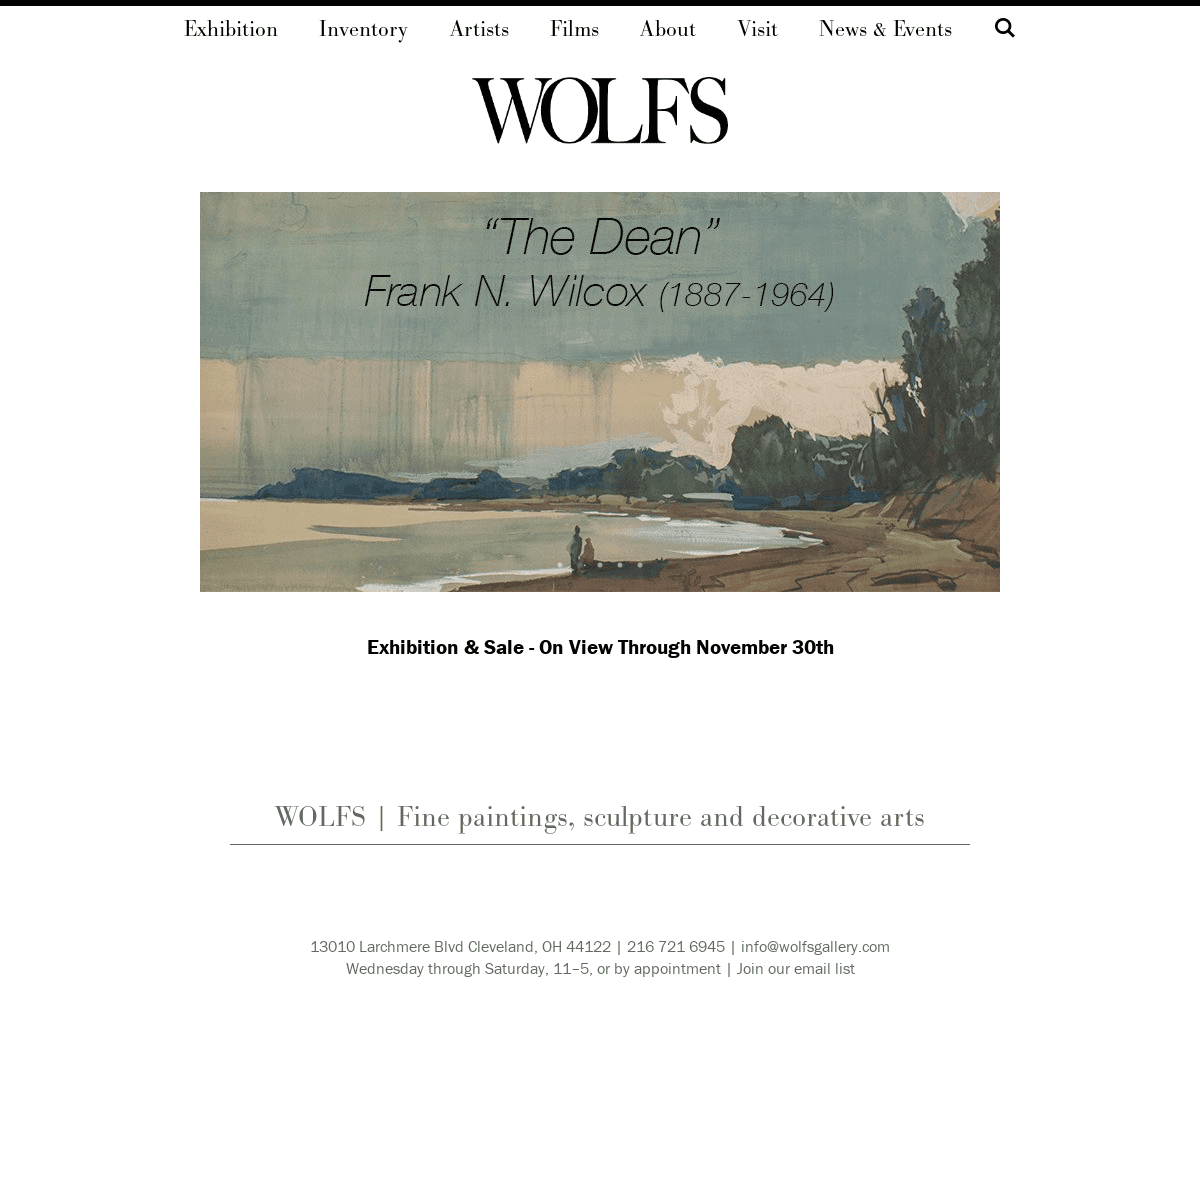 A complete backup of wolfsgallery.com